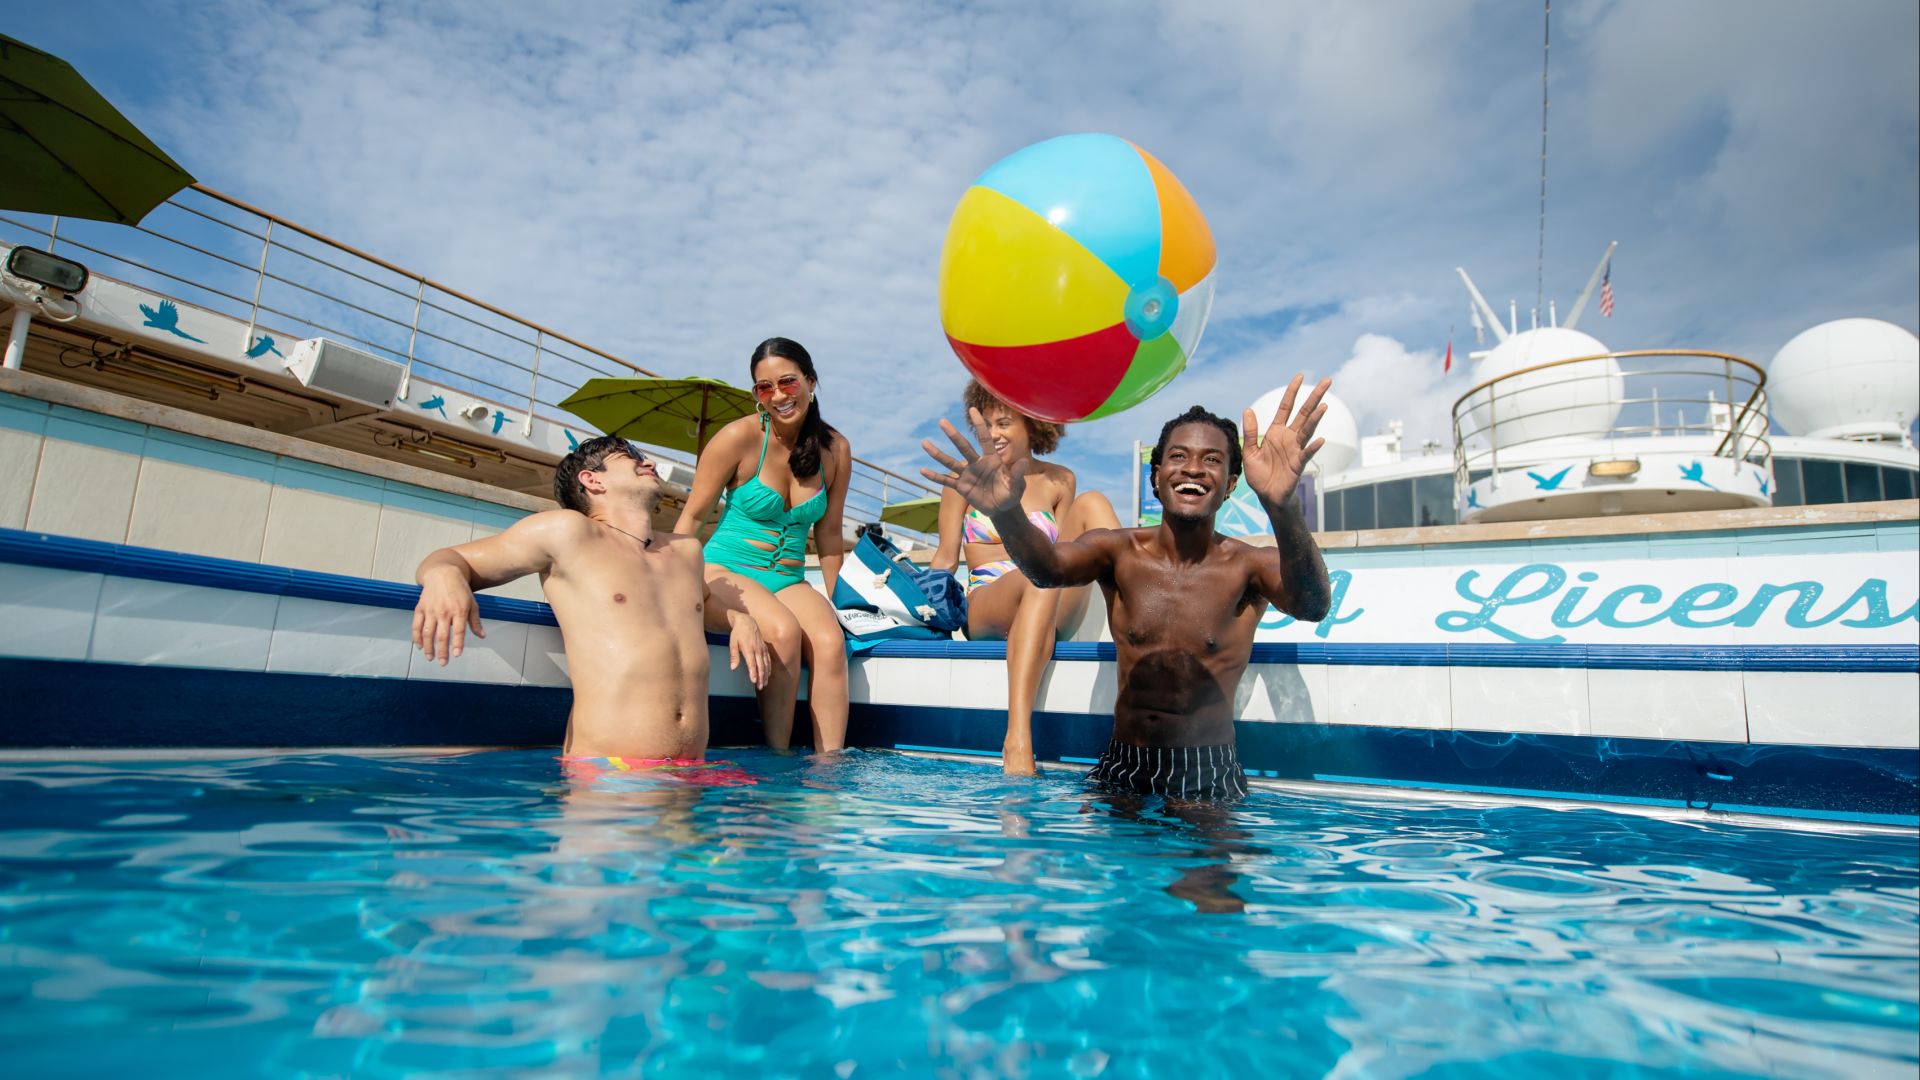 A Group Of People In A Pool With A Balloon